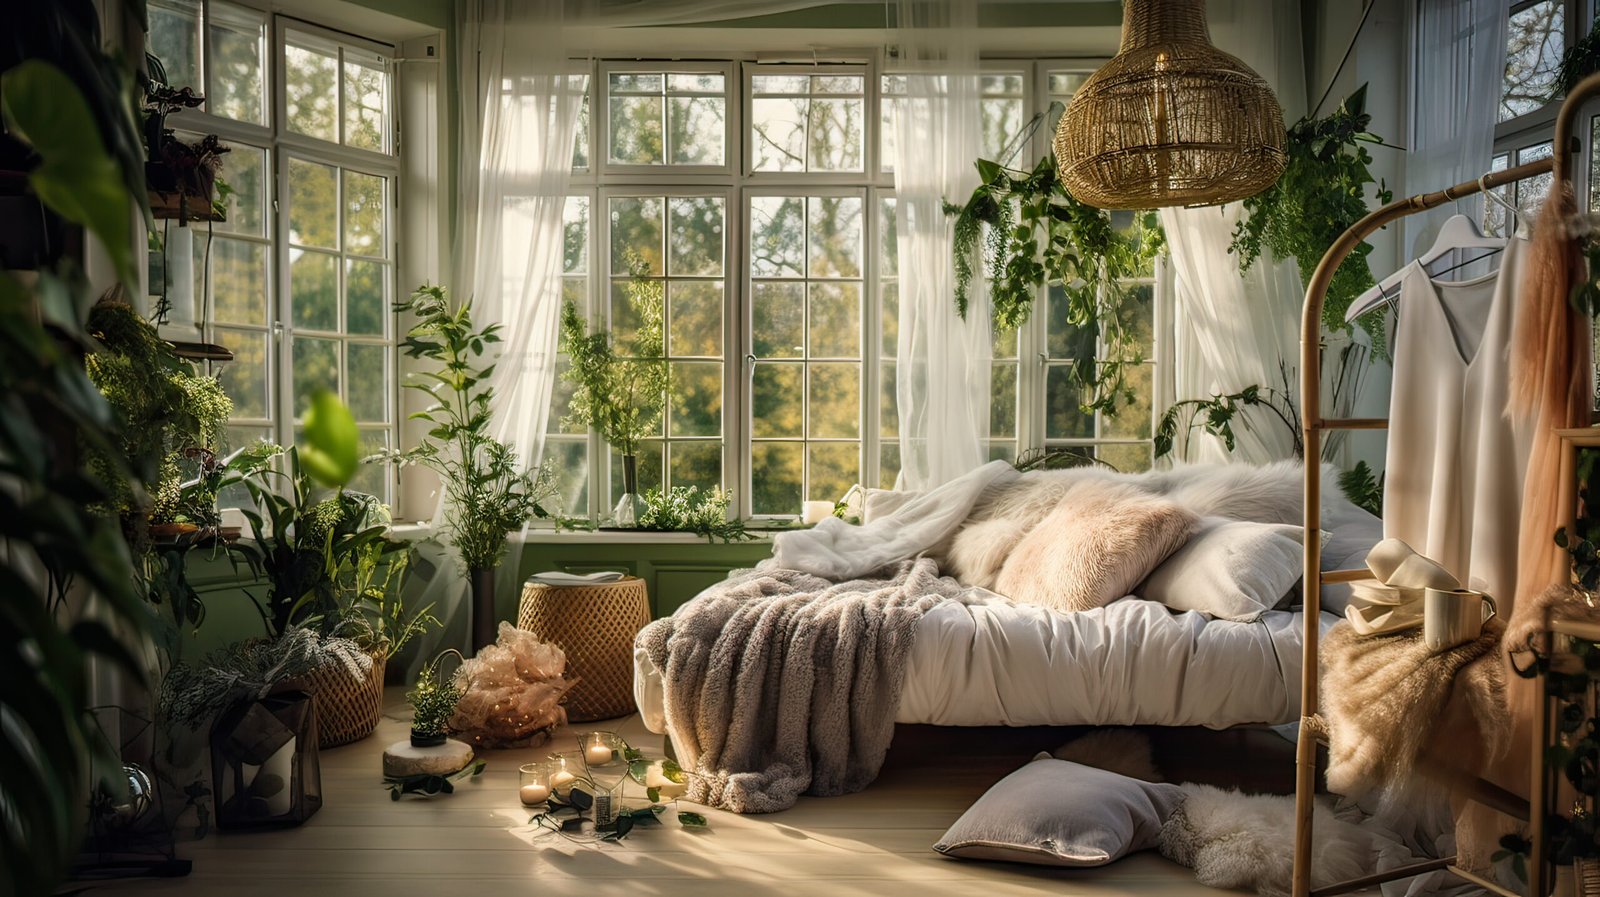 Bedroom with large window and lots of plants.